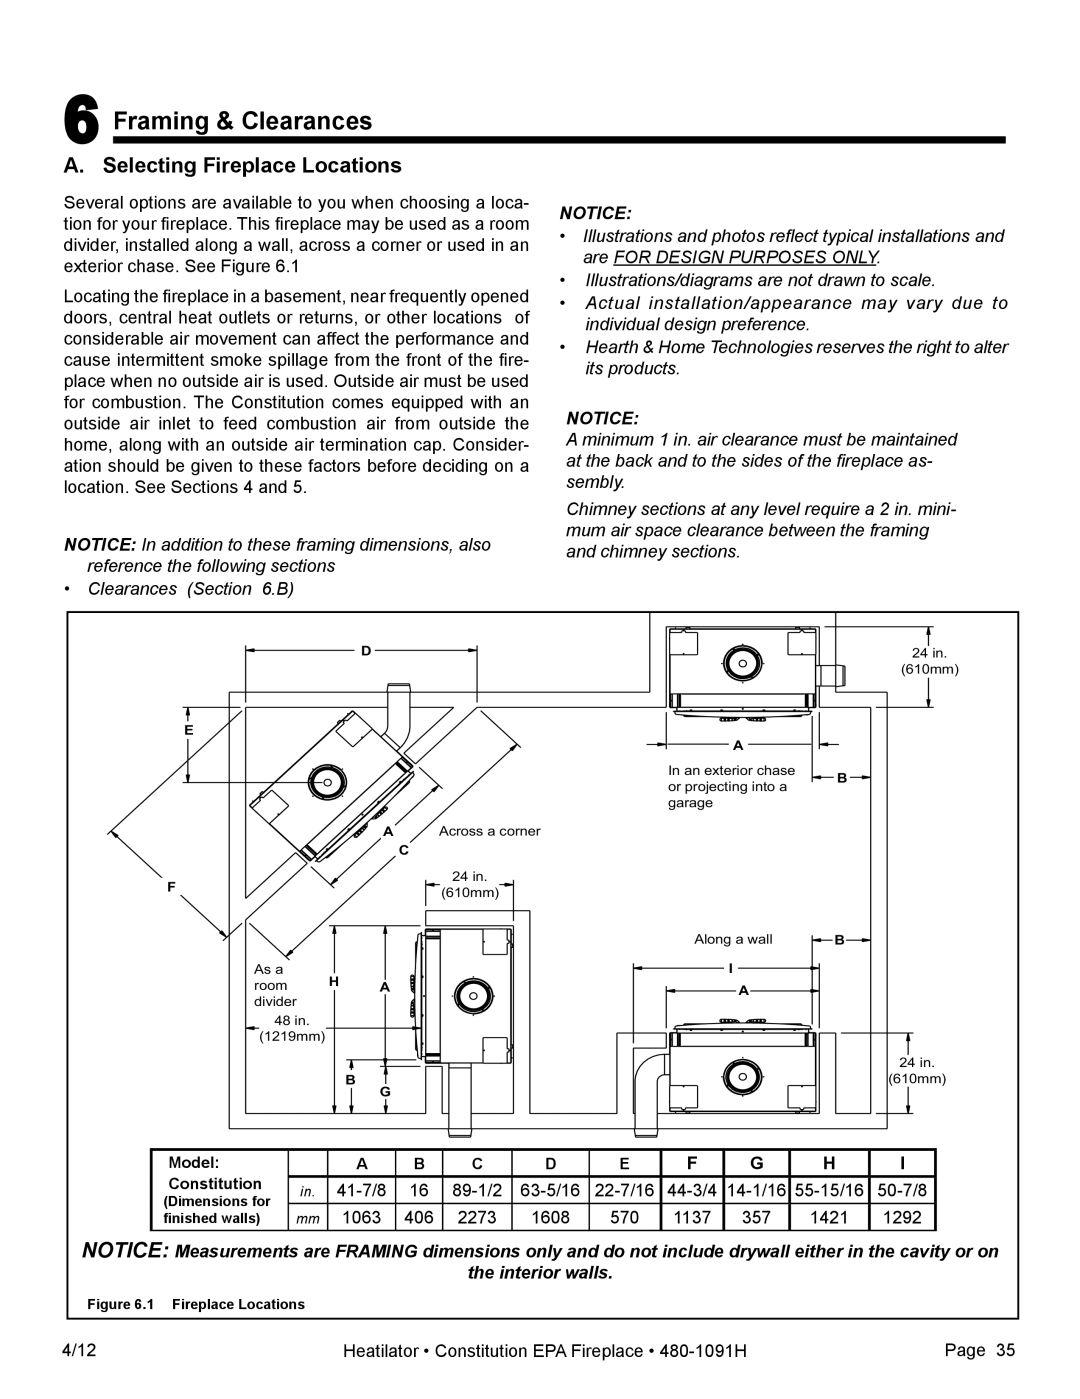 Heatiator C40 owner manual 6Framing & Clearances, A. Selecting Fireplace Locations, Notice, the interior walls 